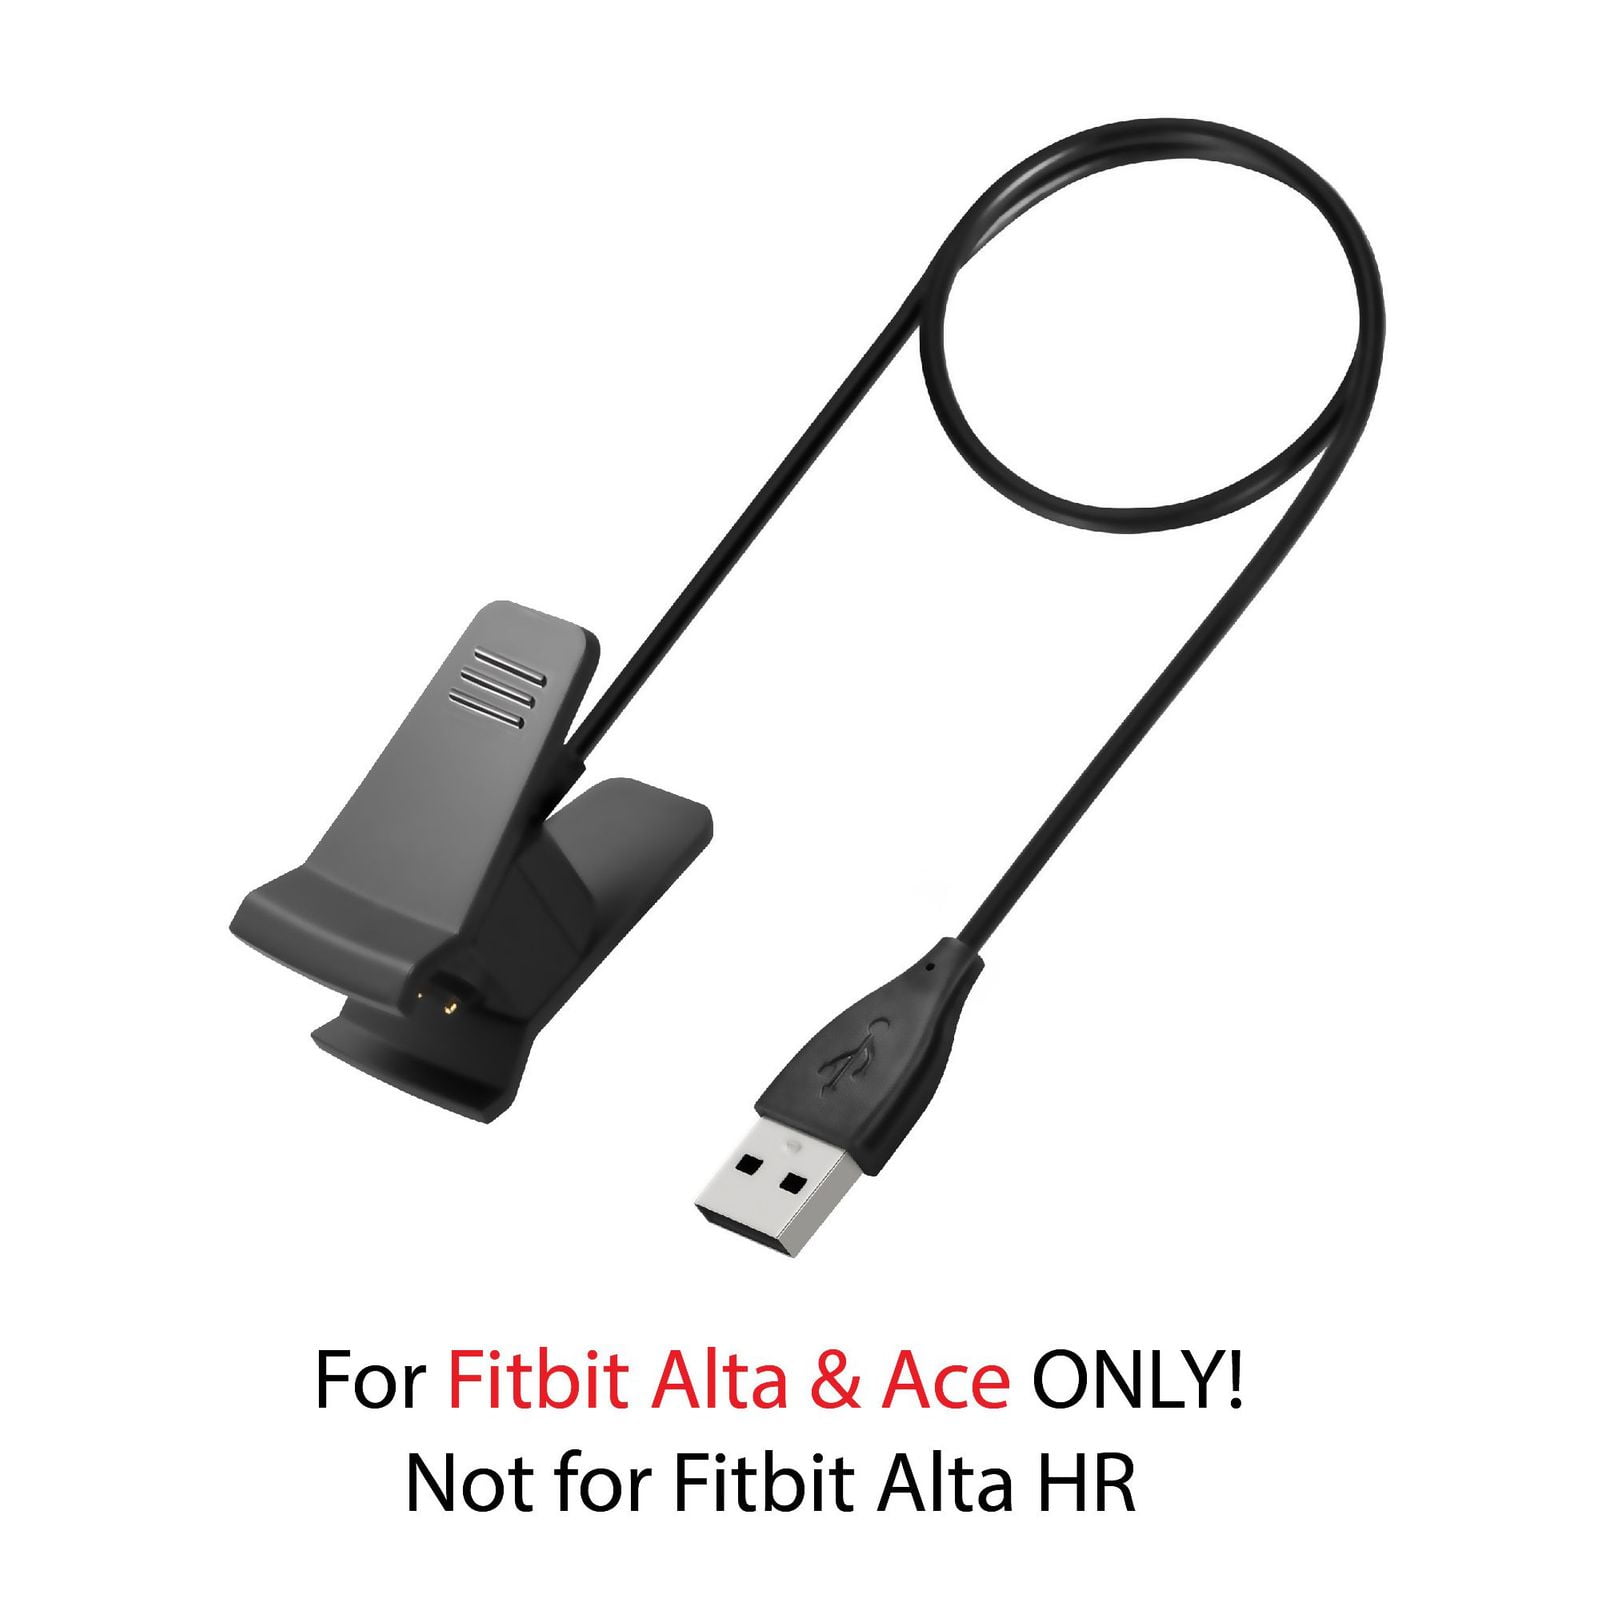 Replacement USB Charging Cradle Cable With Reset Button For Fitbit Alta HR 1M 